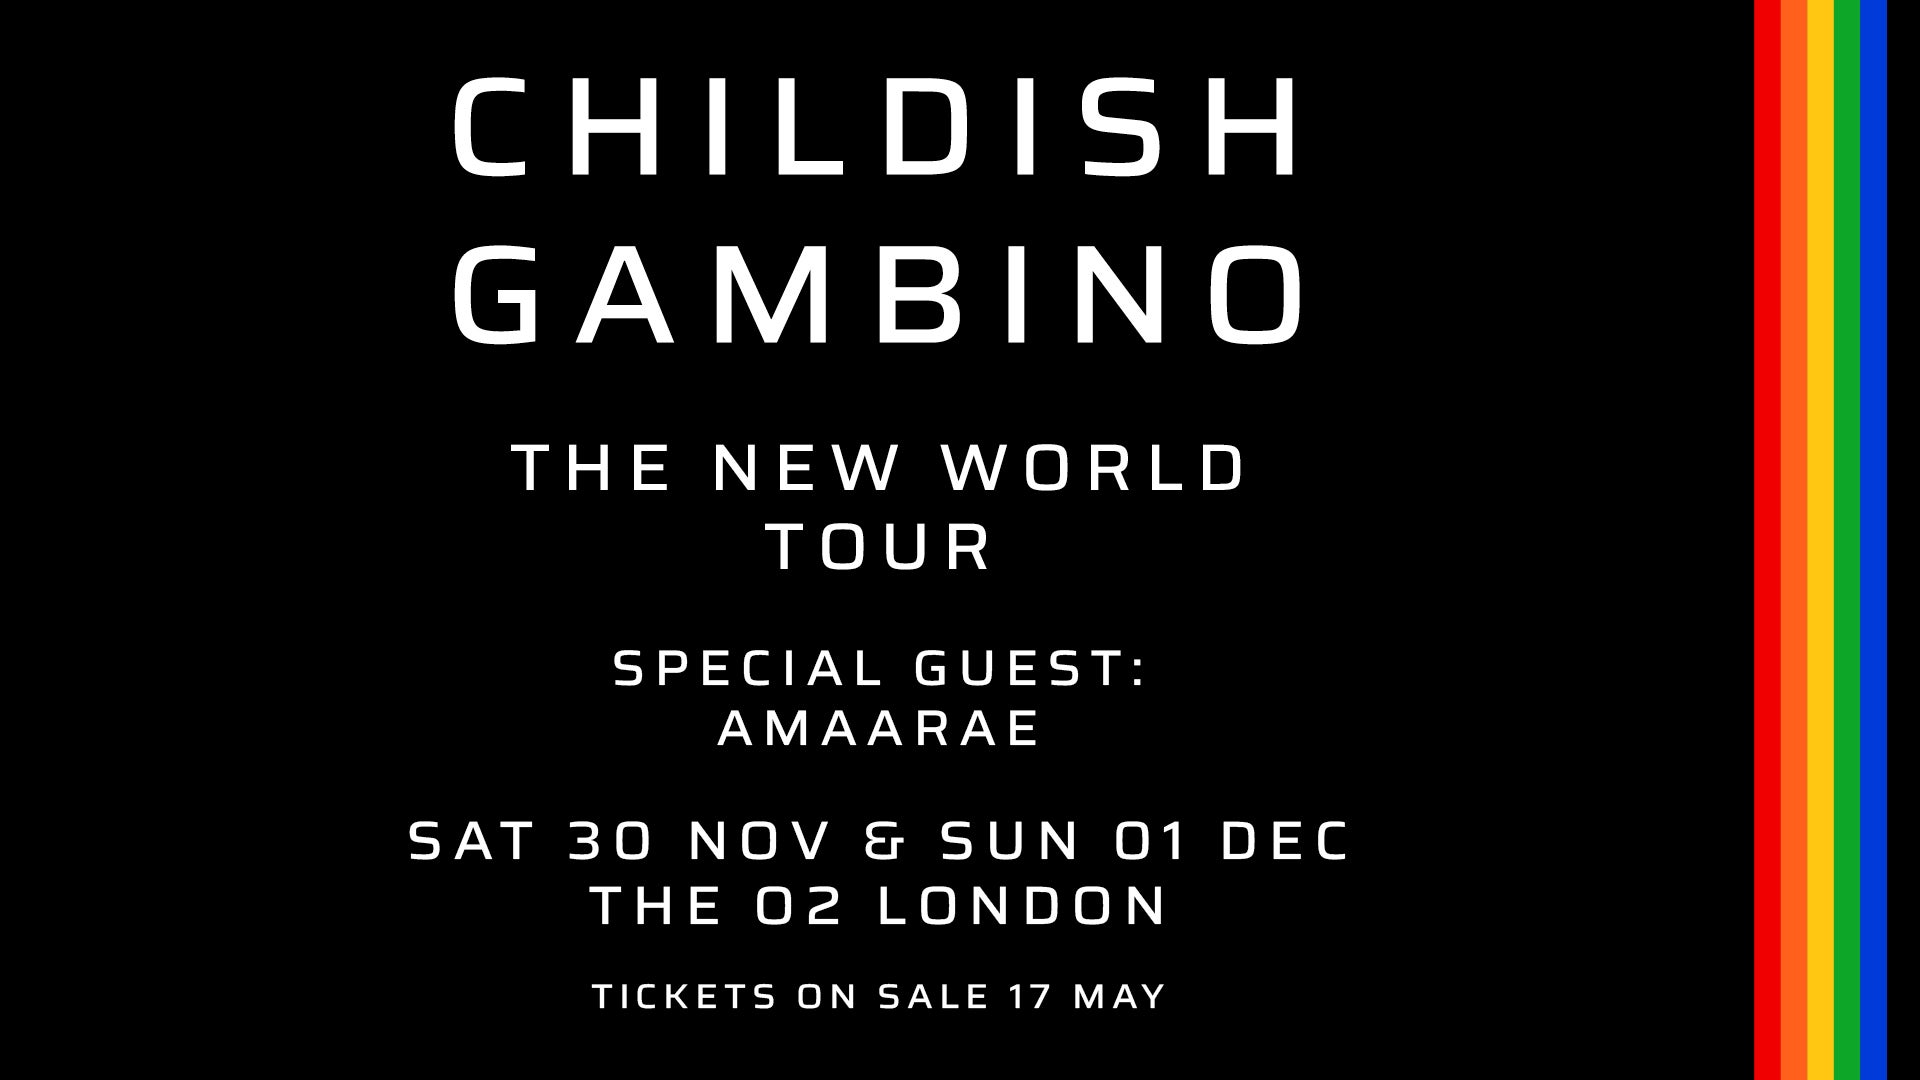 Artwork for Childish Gambino's show at The O2